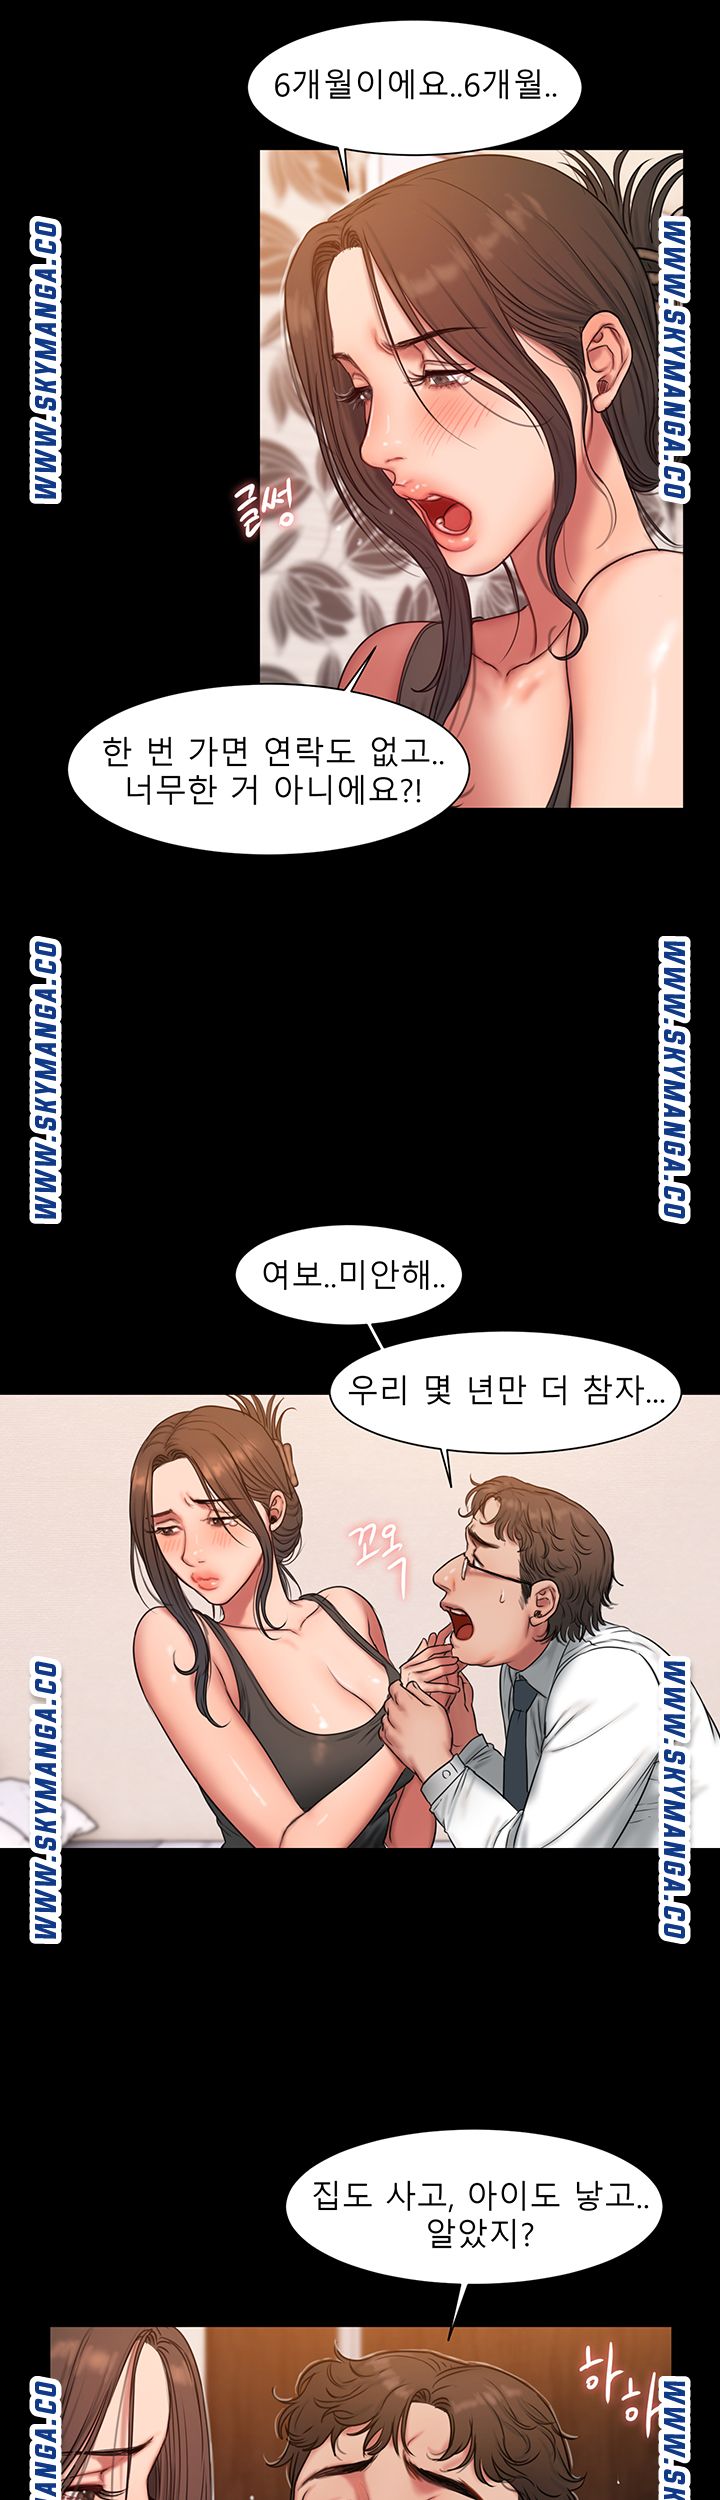 Friends Raw - Chapter 5 Page 39